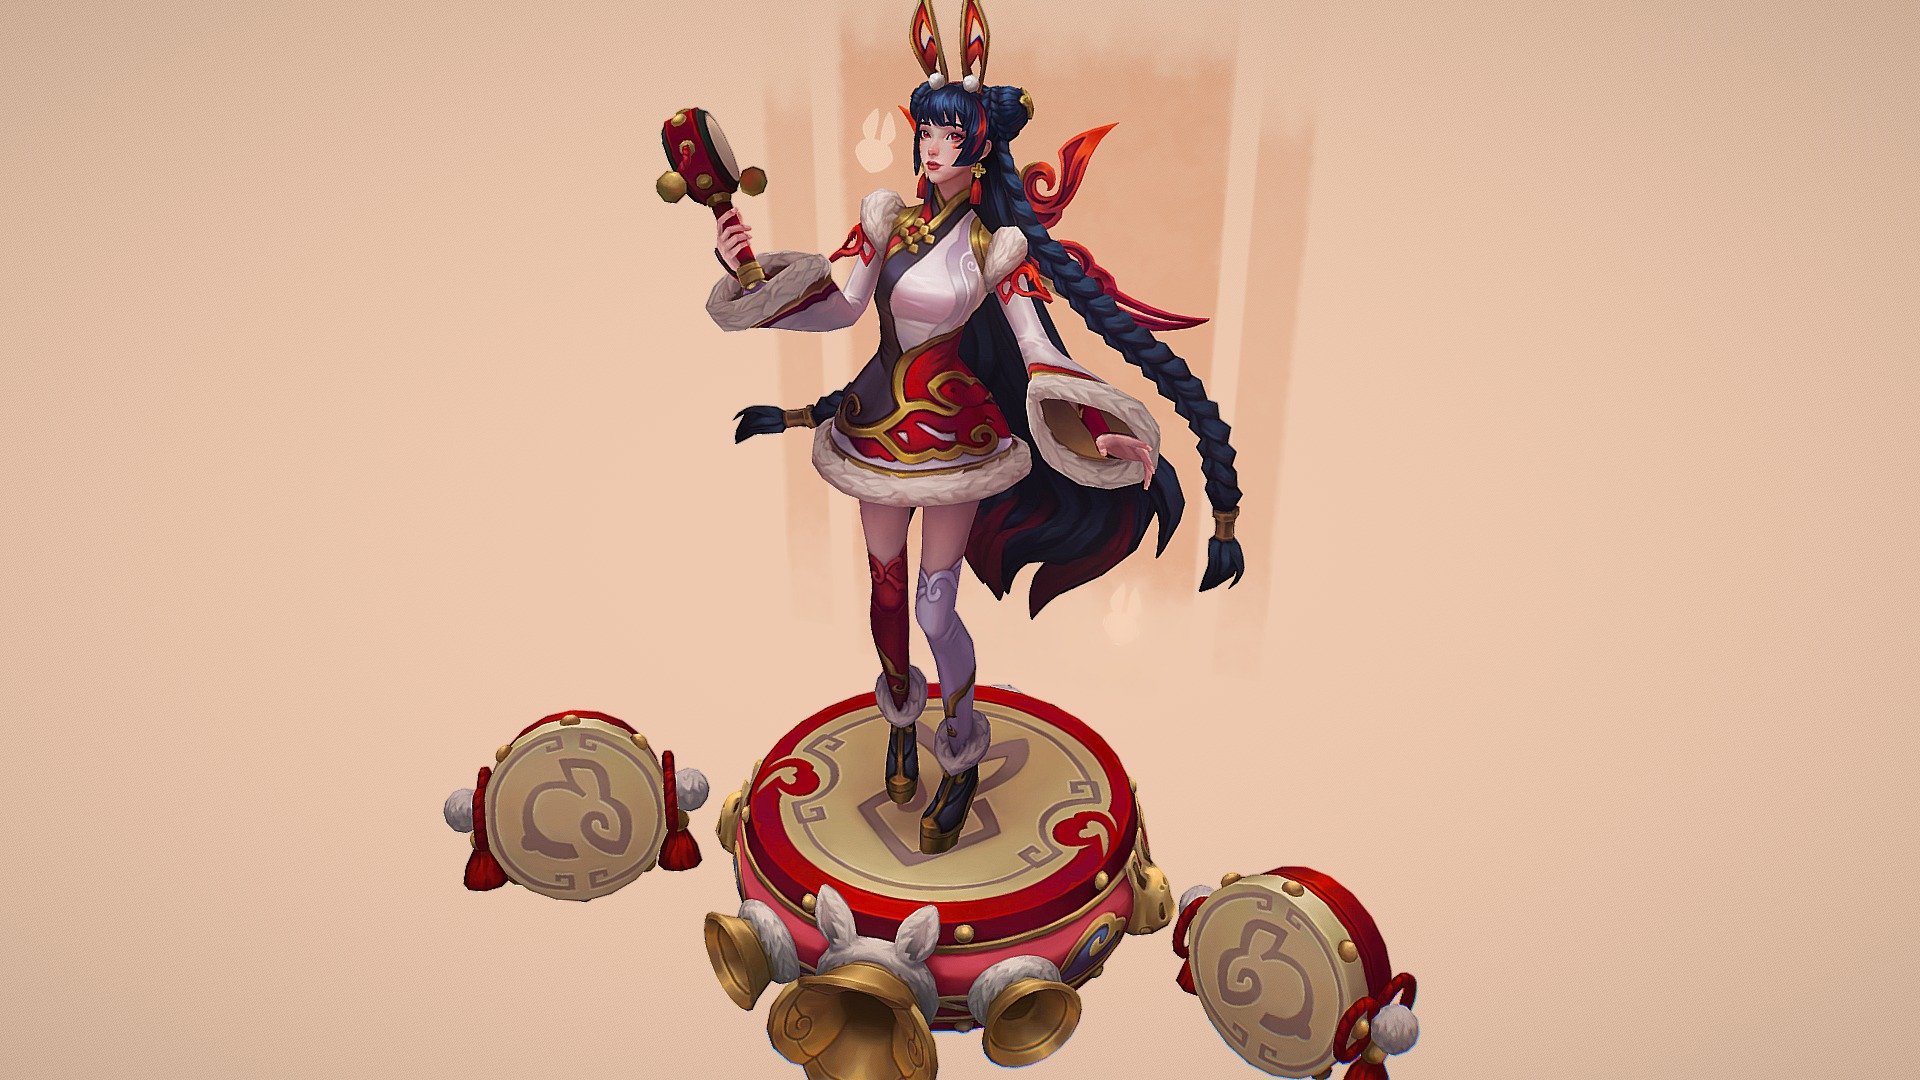 Here's my League of Legends fanart of wild rift's Seraphine Mythmaker skin!
More renders on artstation:
https://www.artstation.com/kenyart
Amazing concept art from Riot games
https://www.artstation.com/artwork/YKNRaP
I tried to adapt the Wild Rift concept to the League of Legends style with a strong silhouette, top-down lighting and more. I learned a lot doing this project, especially thanks to my mentor Annie Kwon who helped me so much during the creation of this character! 
https://www.artstation.com/kittysleuths
Also special thanks to David Ko, Lomée Gouthard, Alan Albiach, Thomas Guedes for their great feedback!!
I look forward to sharing more stylized characters with you! - Seraphine MythMaker League of Legends Fanskin - 3D model by Keny Bigny (@KenyBigny) 3d model